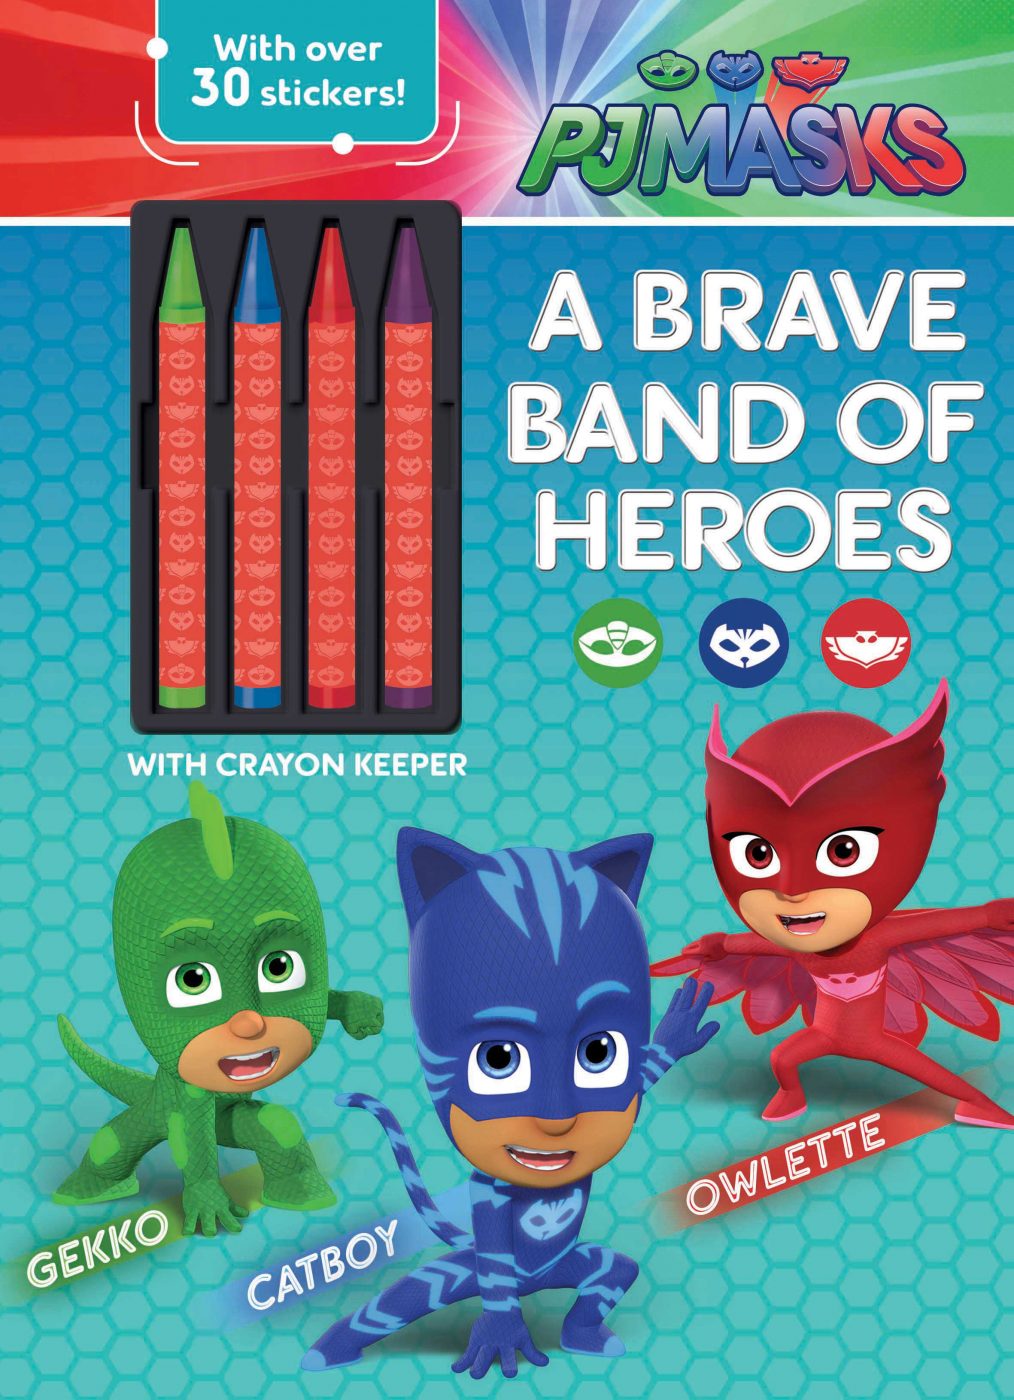 PJ Masks Activity Pages to Print at Home! - Studio Fun International